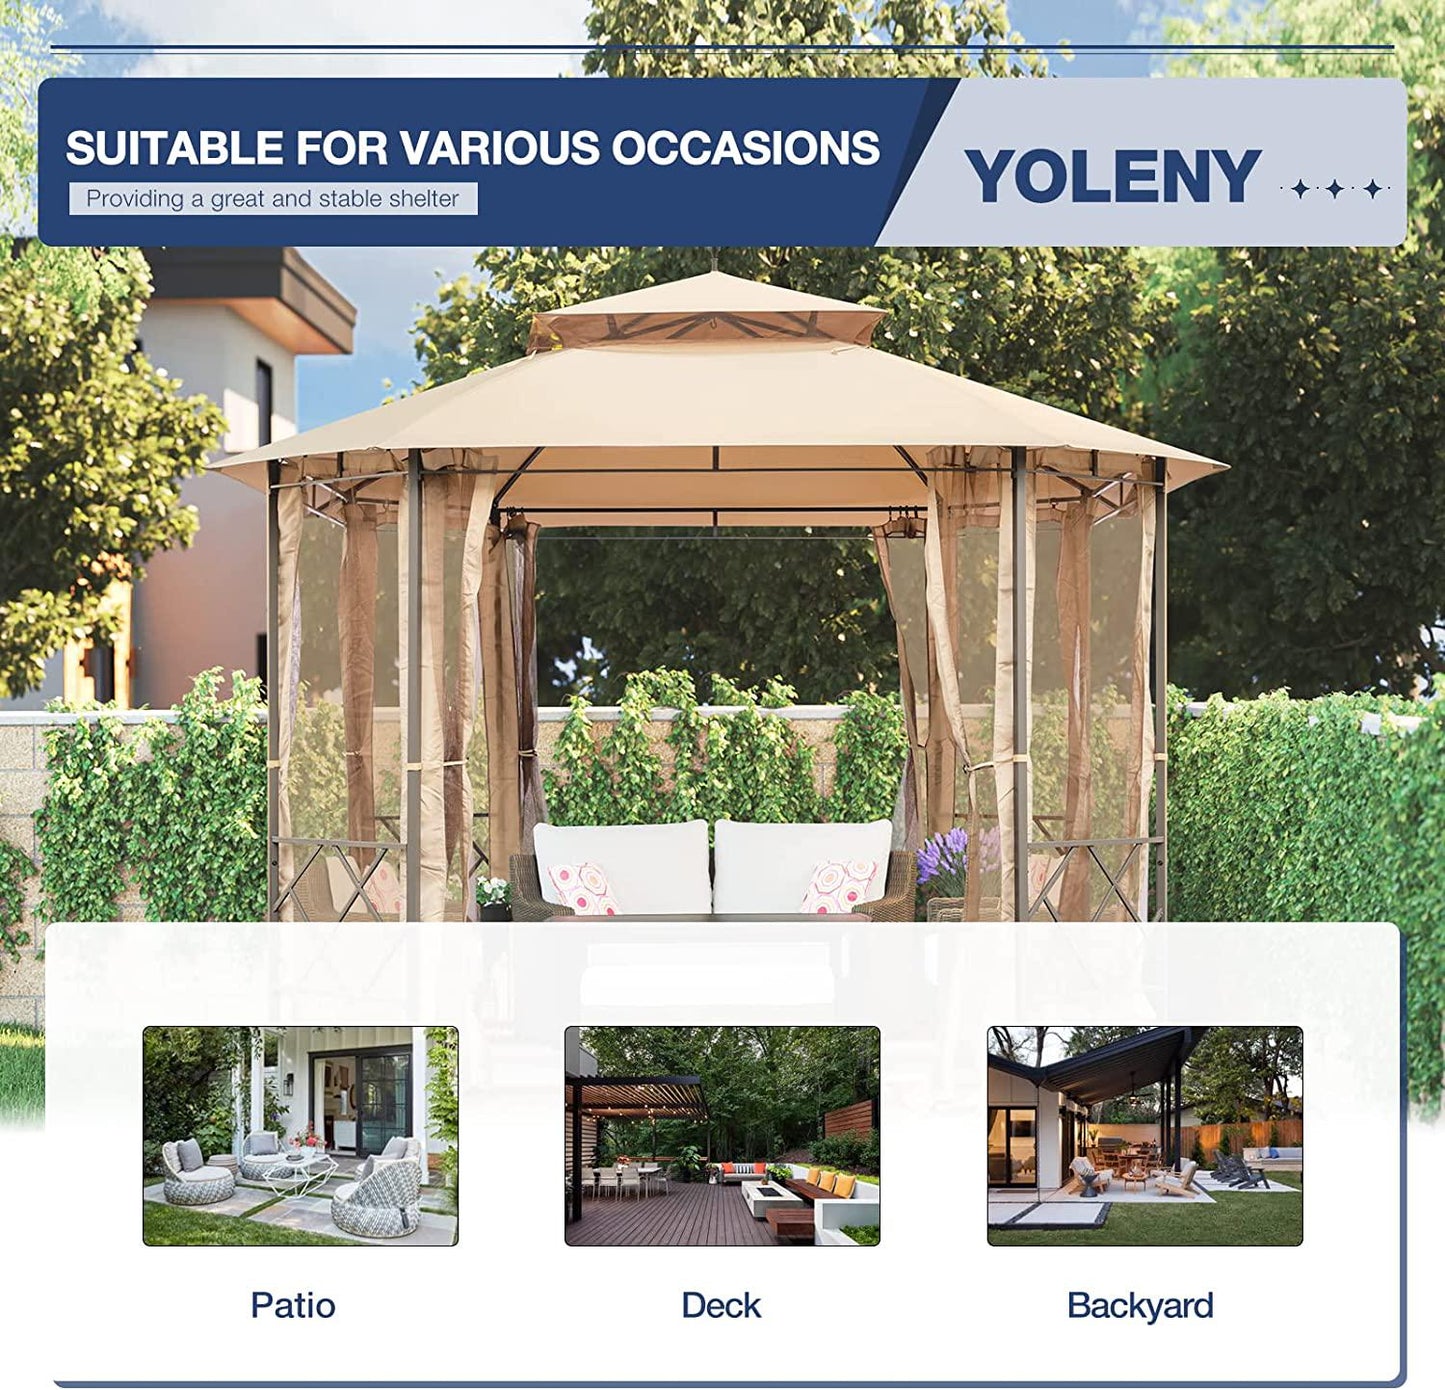 YOLENY 12';x10'; Patio Canopy,Gazebo with Mesh Curtains and Safety Bars, Waterproof Double Roof Tops, for Garden, Backyard,Parties, Deck, Khaki